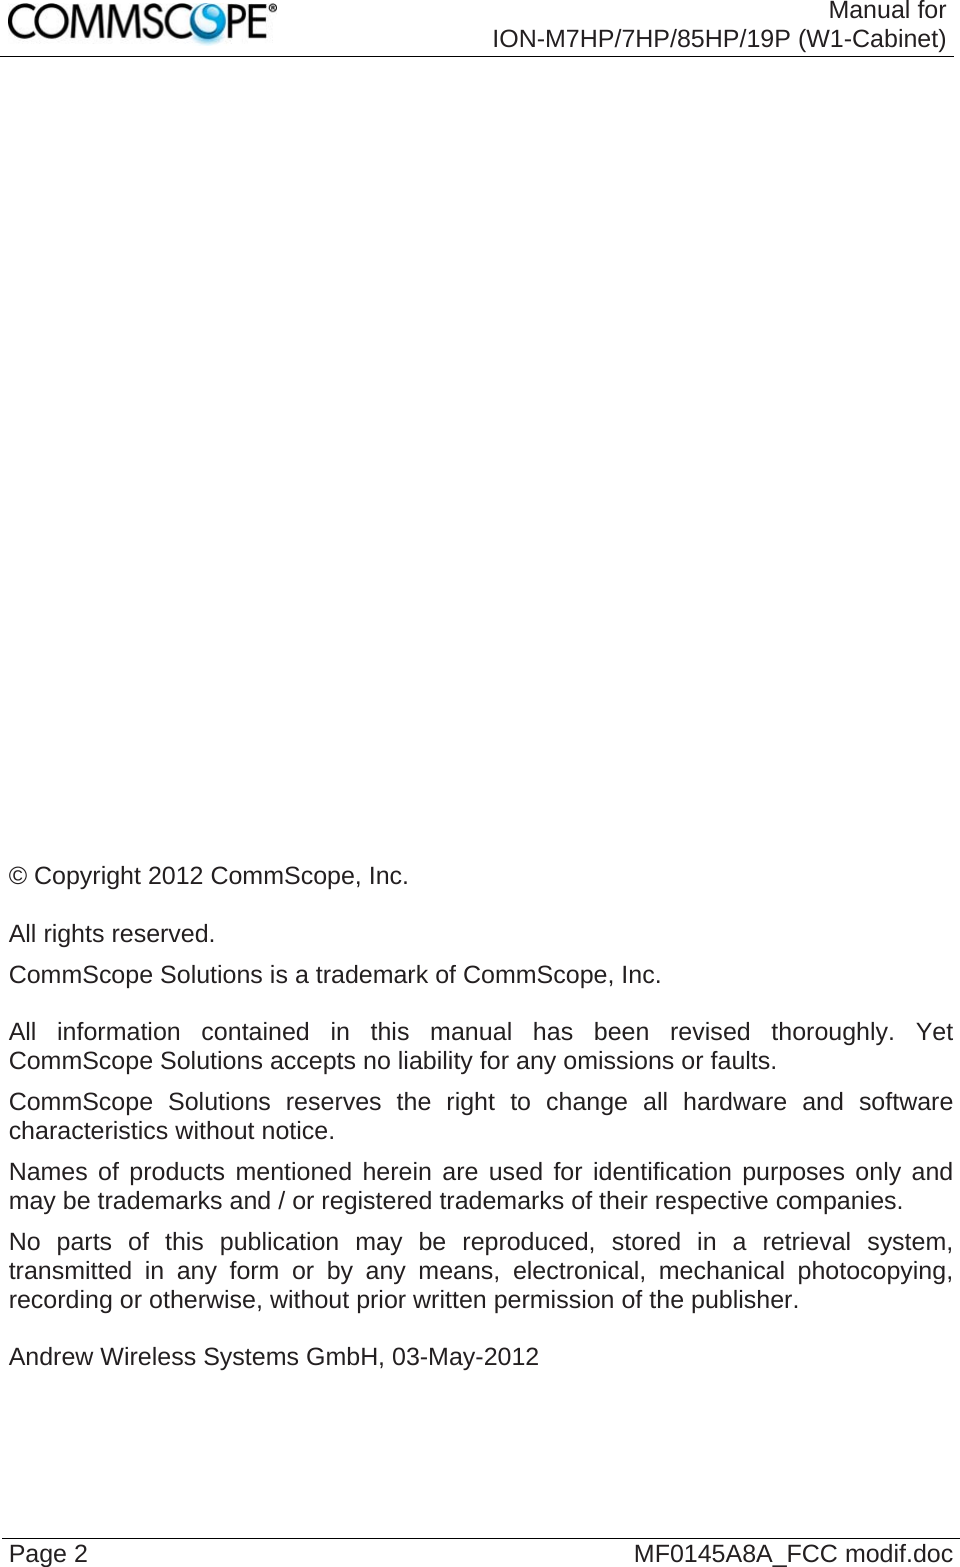  Manual for ION-M7HP/7HP/85HP/19P (W1-Cabinet) Page 2  MF0145A8A_FCC modif.doc                            © Copyright 2012 CommScope, Inc.  All rights reserved. CommScope Solutions is a trademark of CommScope, Inc.  All information contained in this manual has been revised thoroughly. Yet CommScope Solutions accepts no liability for any omissions or faults. CommScope Solutions reserves the right to change all hardware and software characteristics without notice. Names of products mentioned herein are used for identification purposes only and may be trademarks and / or registered trademarks of their respective companies. No parts of this publication may be reproduced, stored in a retrieval system, transmitted in any form or by any means, electronical, mechanical photocopying, recording or otherwise, without prior written permission of the publisher.  Andrew Wireless Systems GmbH, 03-May-2012  